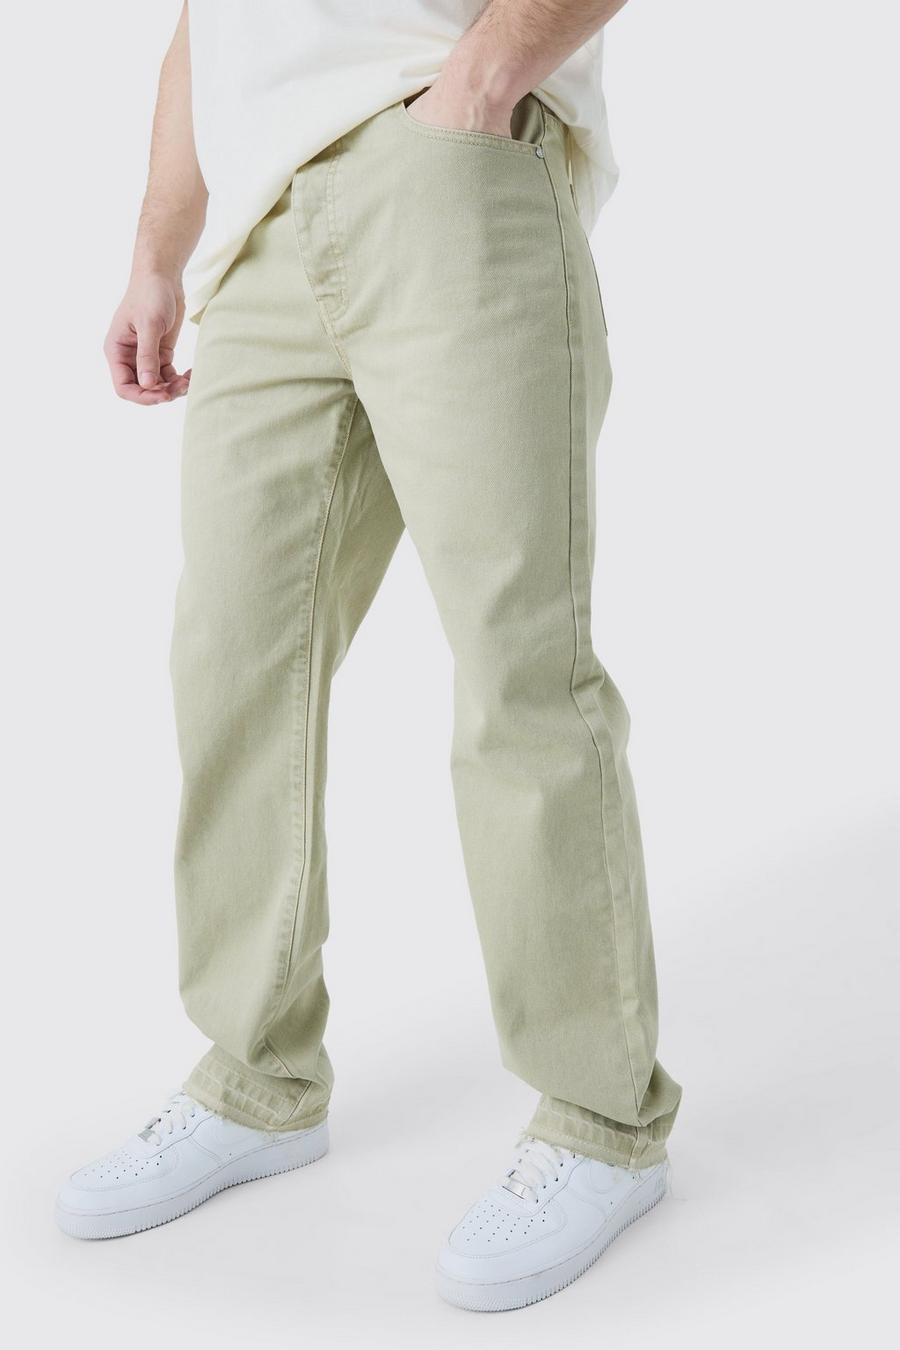 Sage Tall Relaxed Rigid Overdyed Let Down Hem Jeans